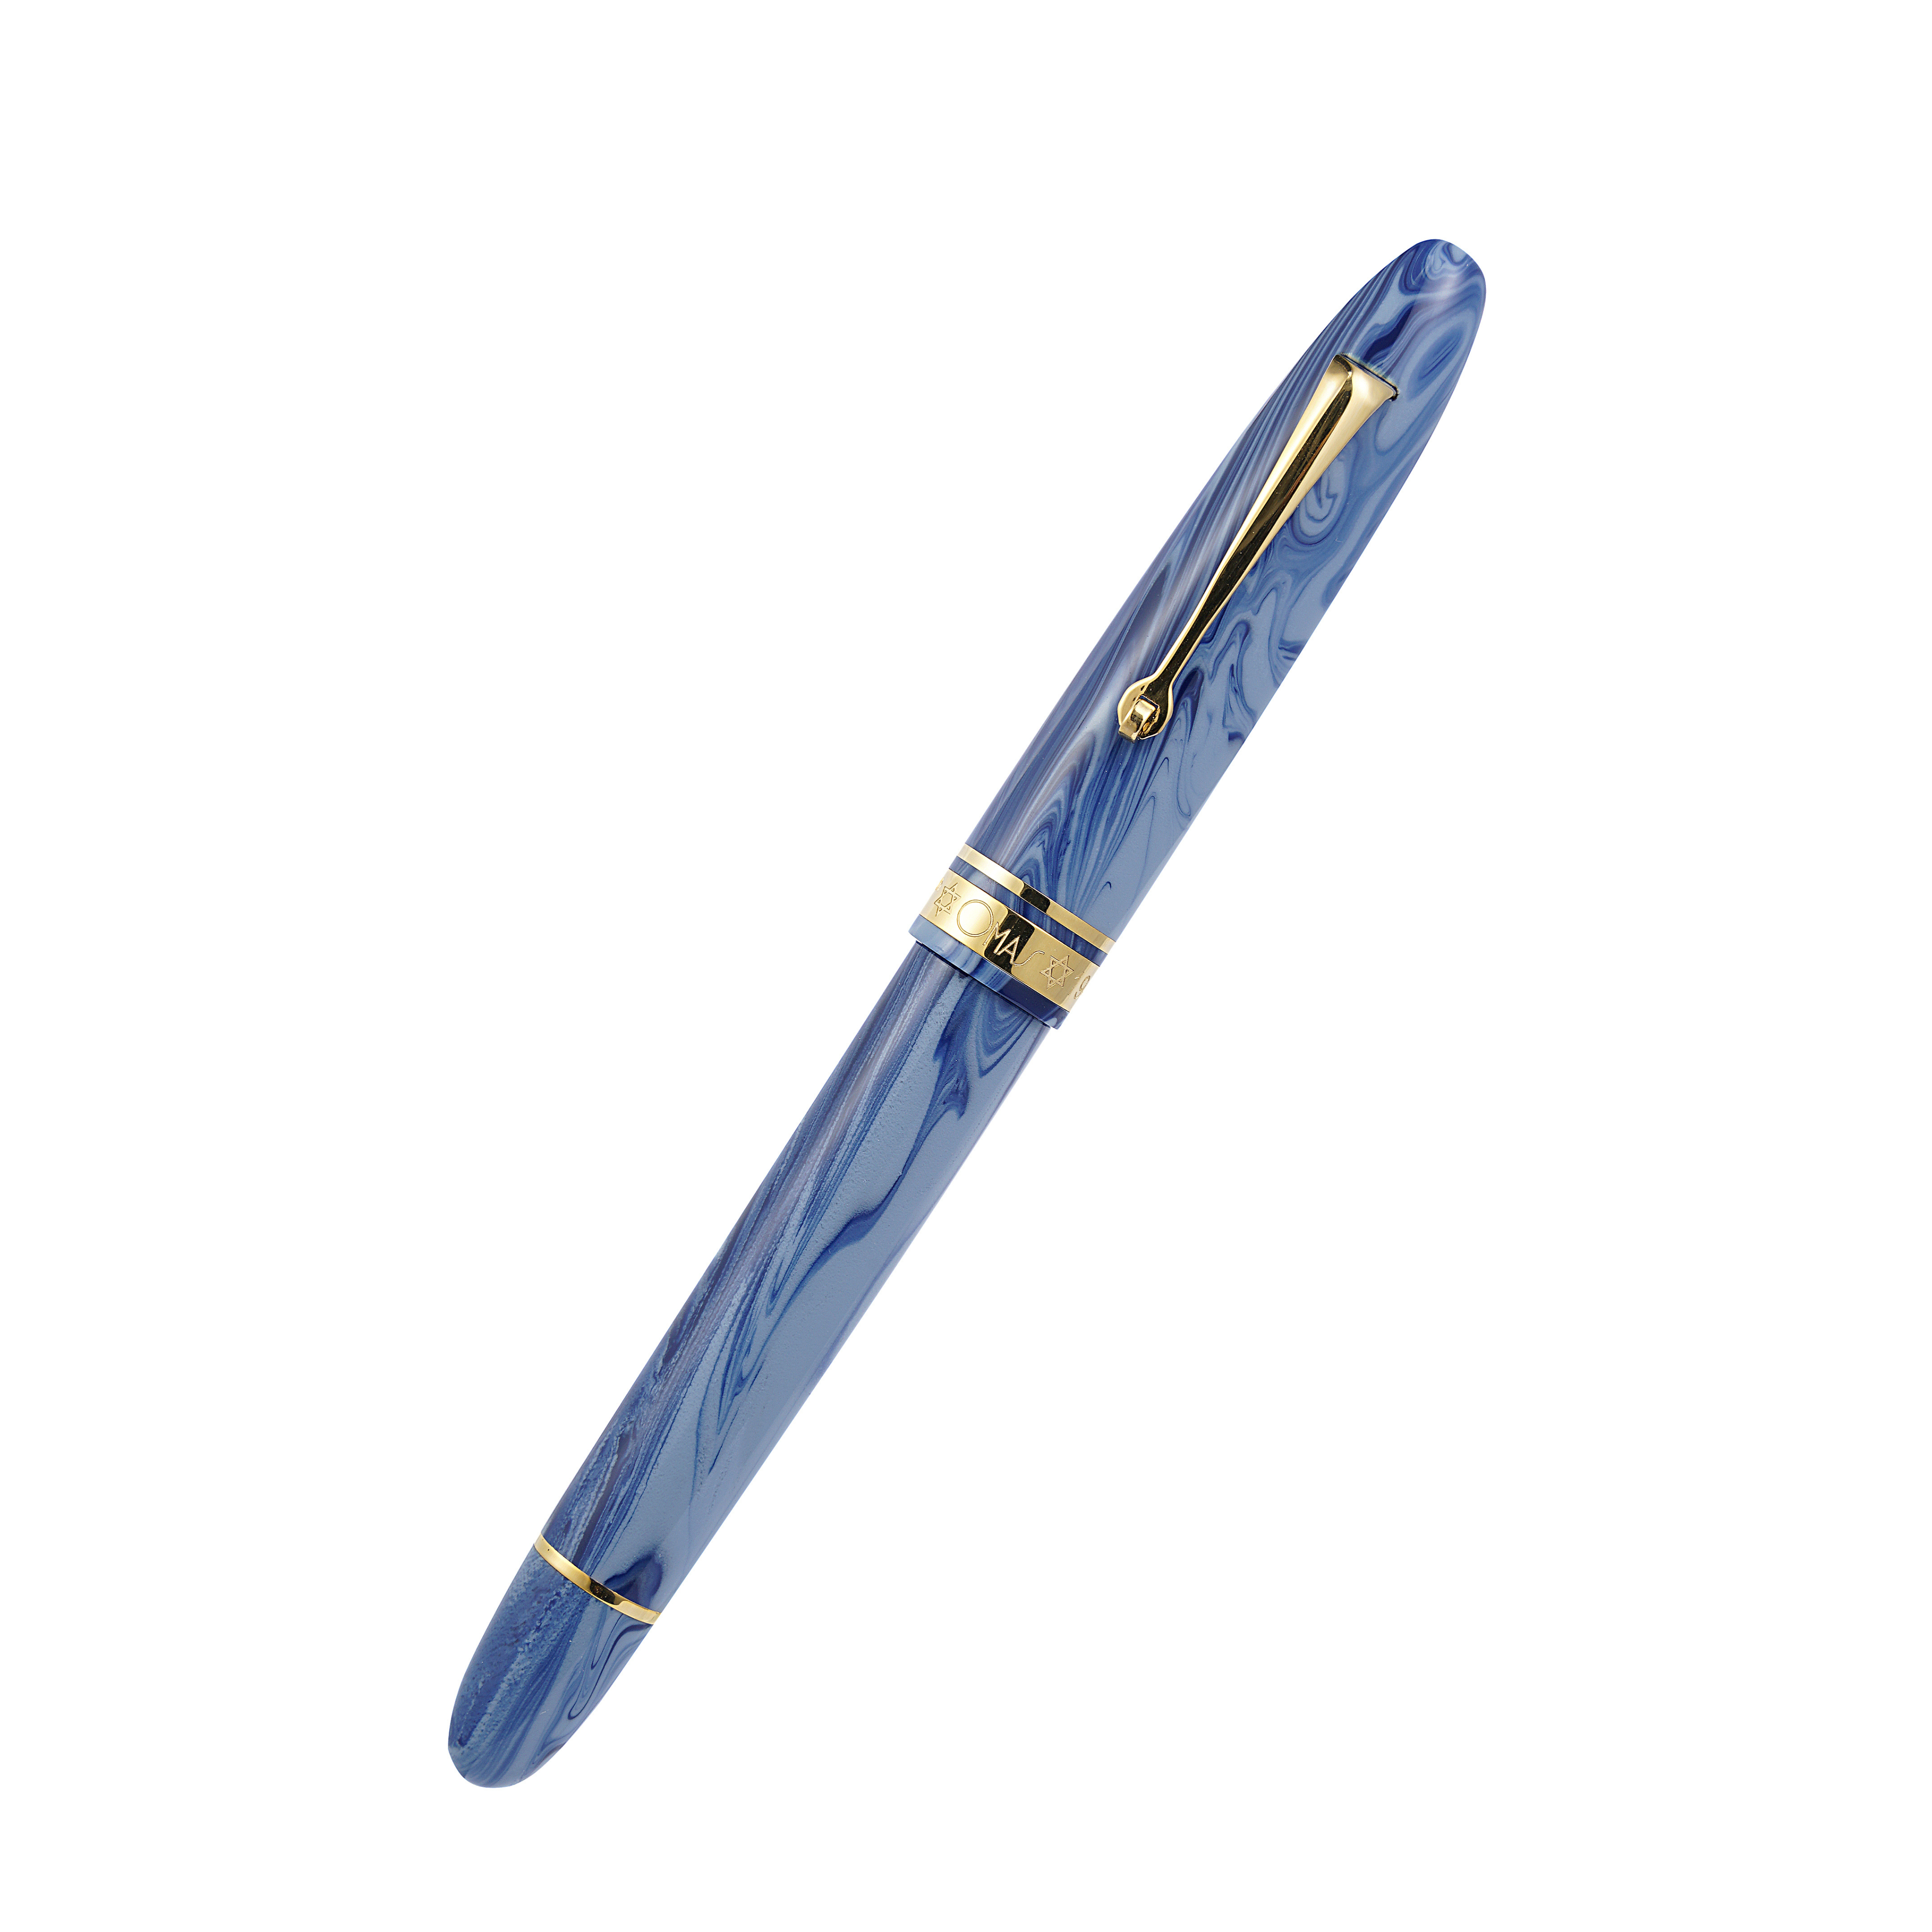 OMAS Ogiva Israel Limited Edition Fountain Pen with Gold Trim